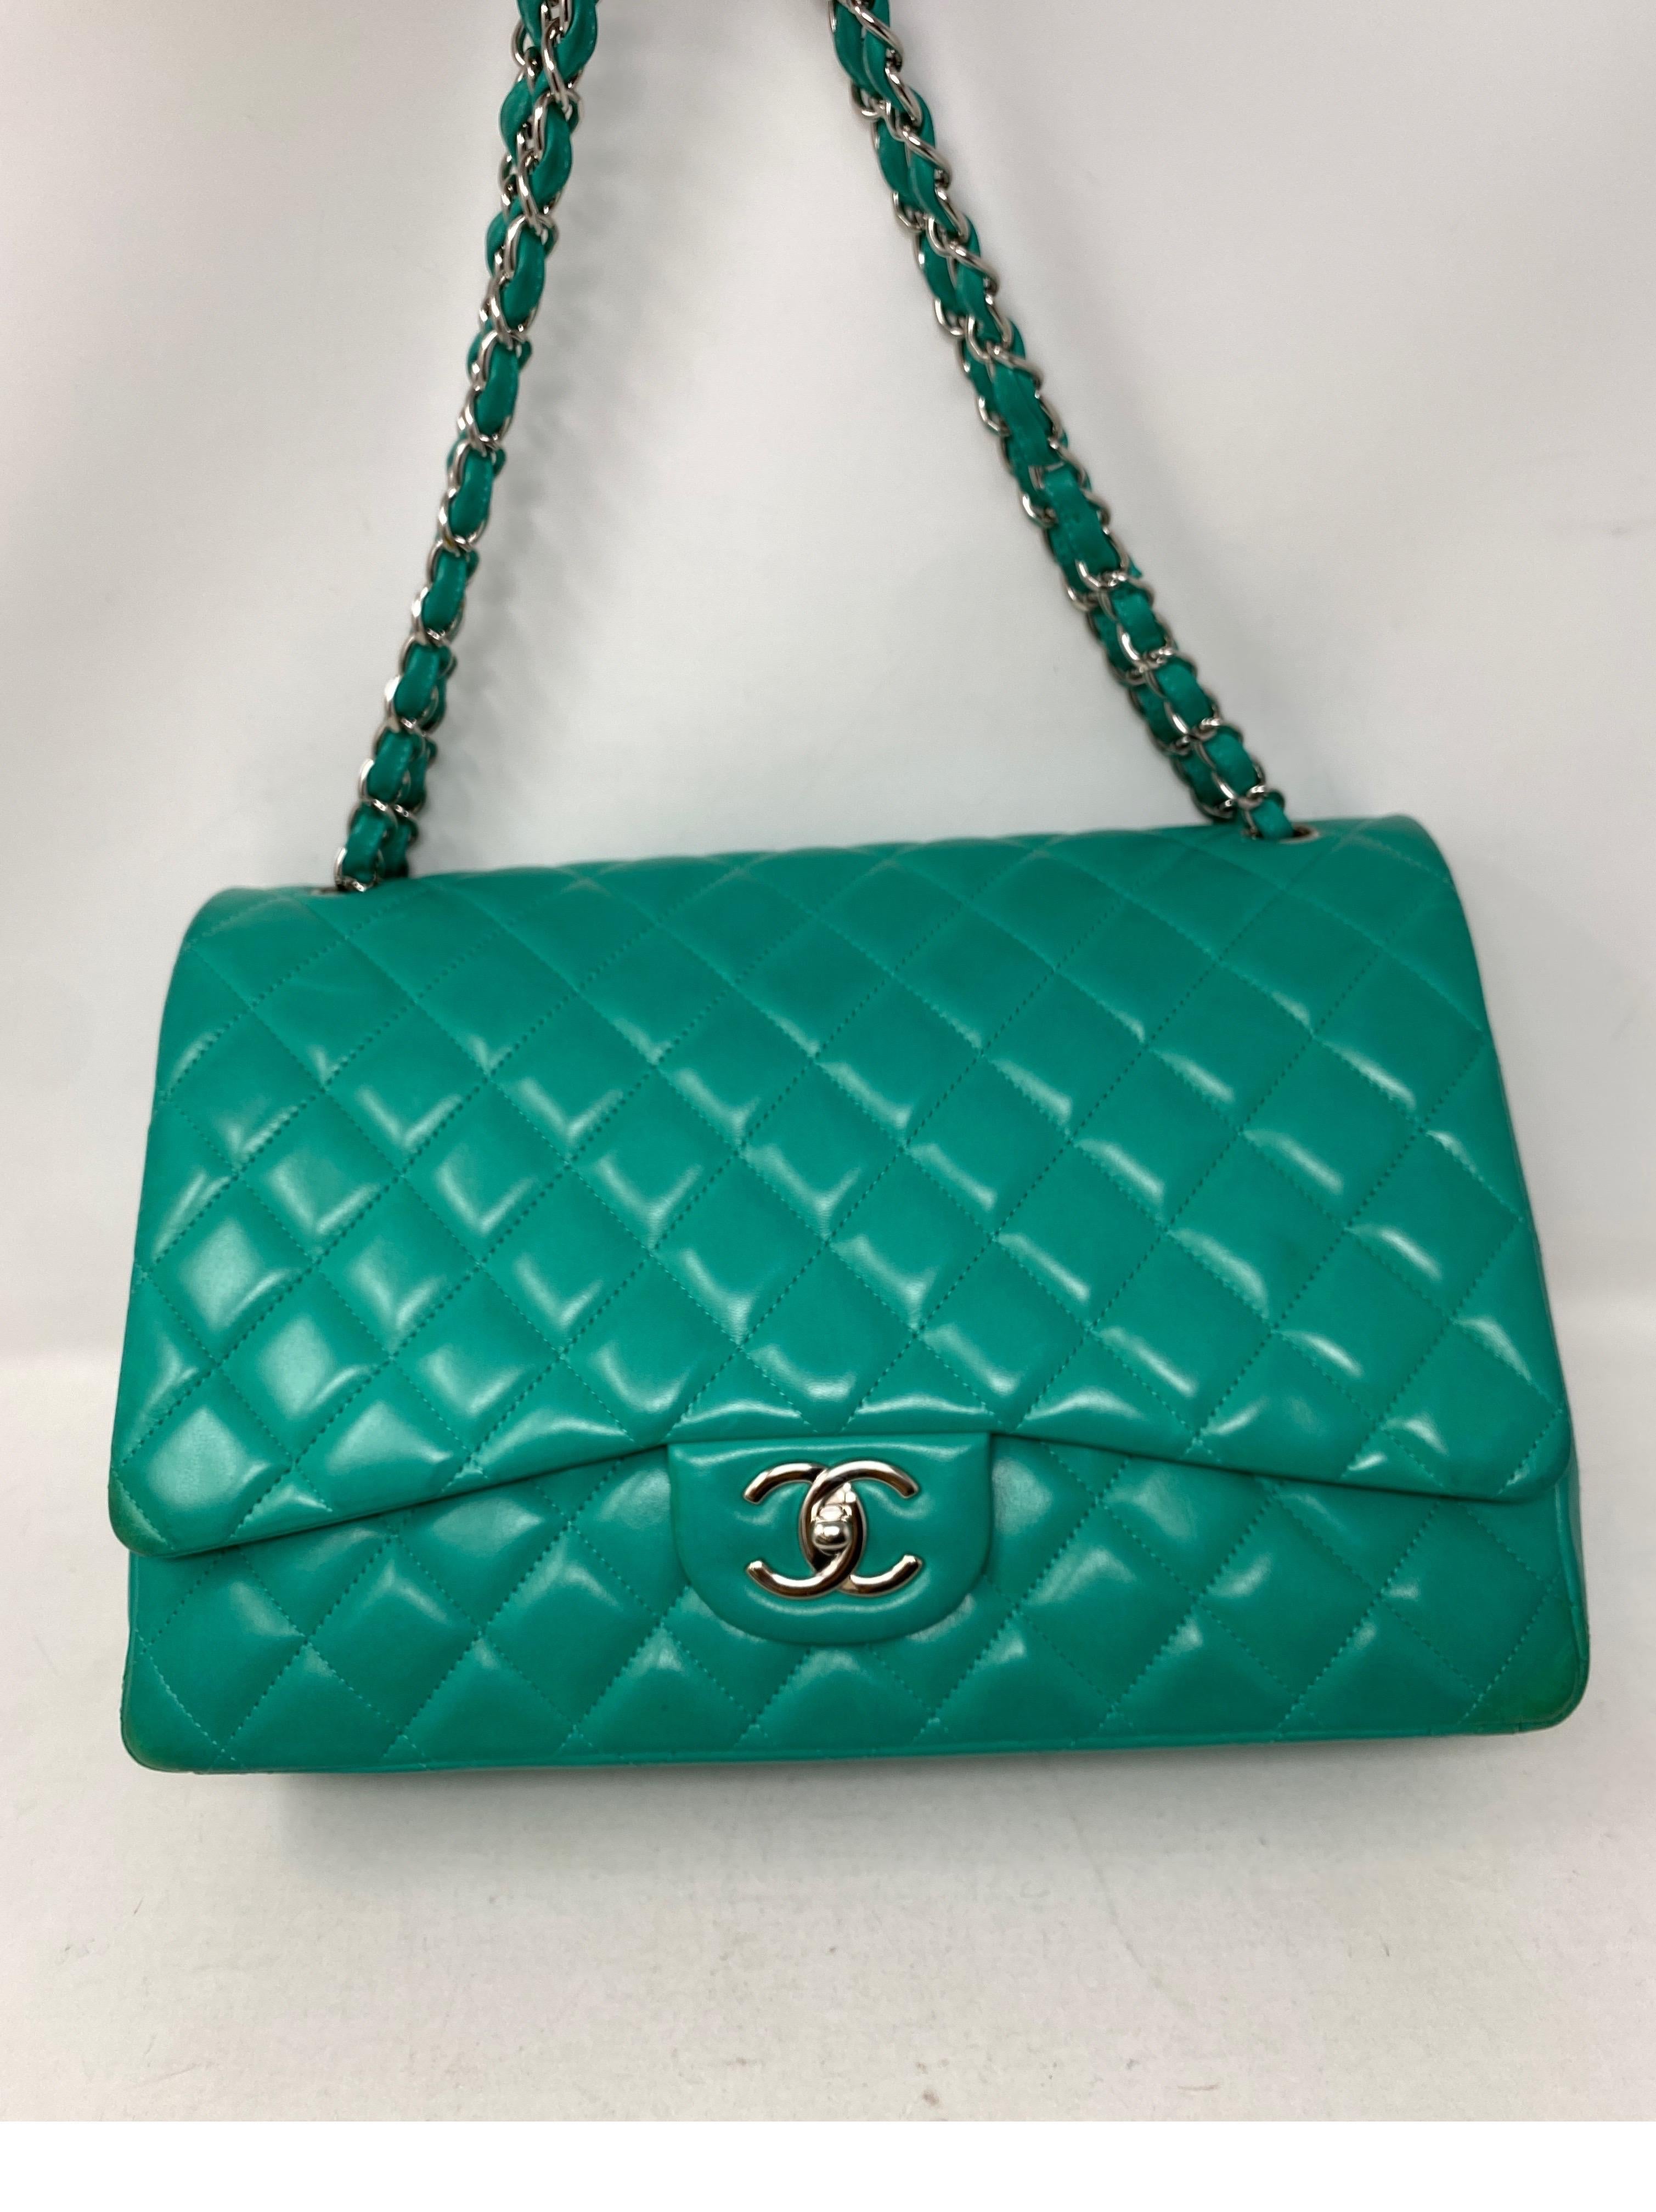 Blue Chanel Teal Maxi Double Flap Bag